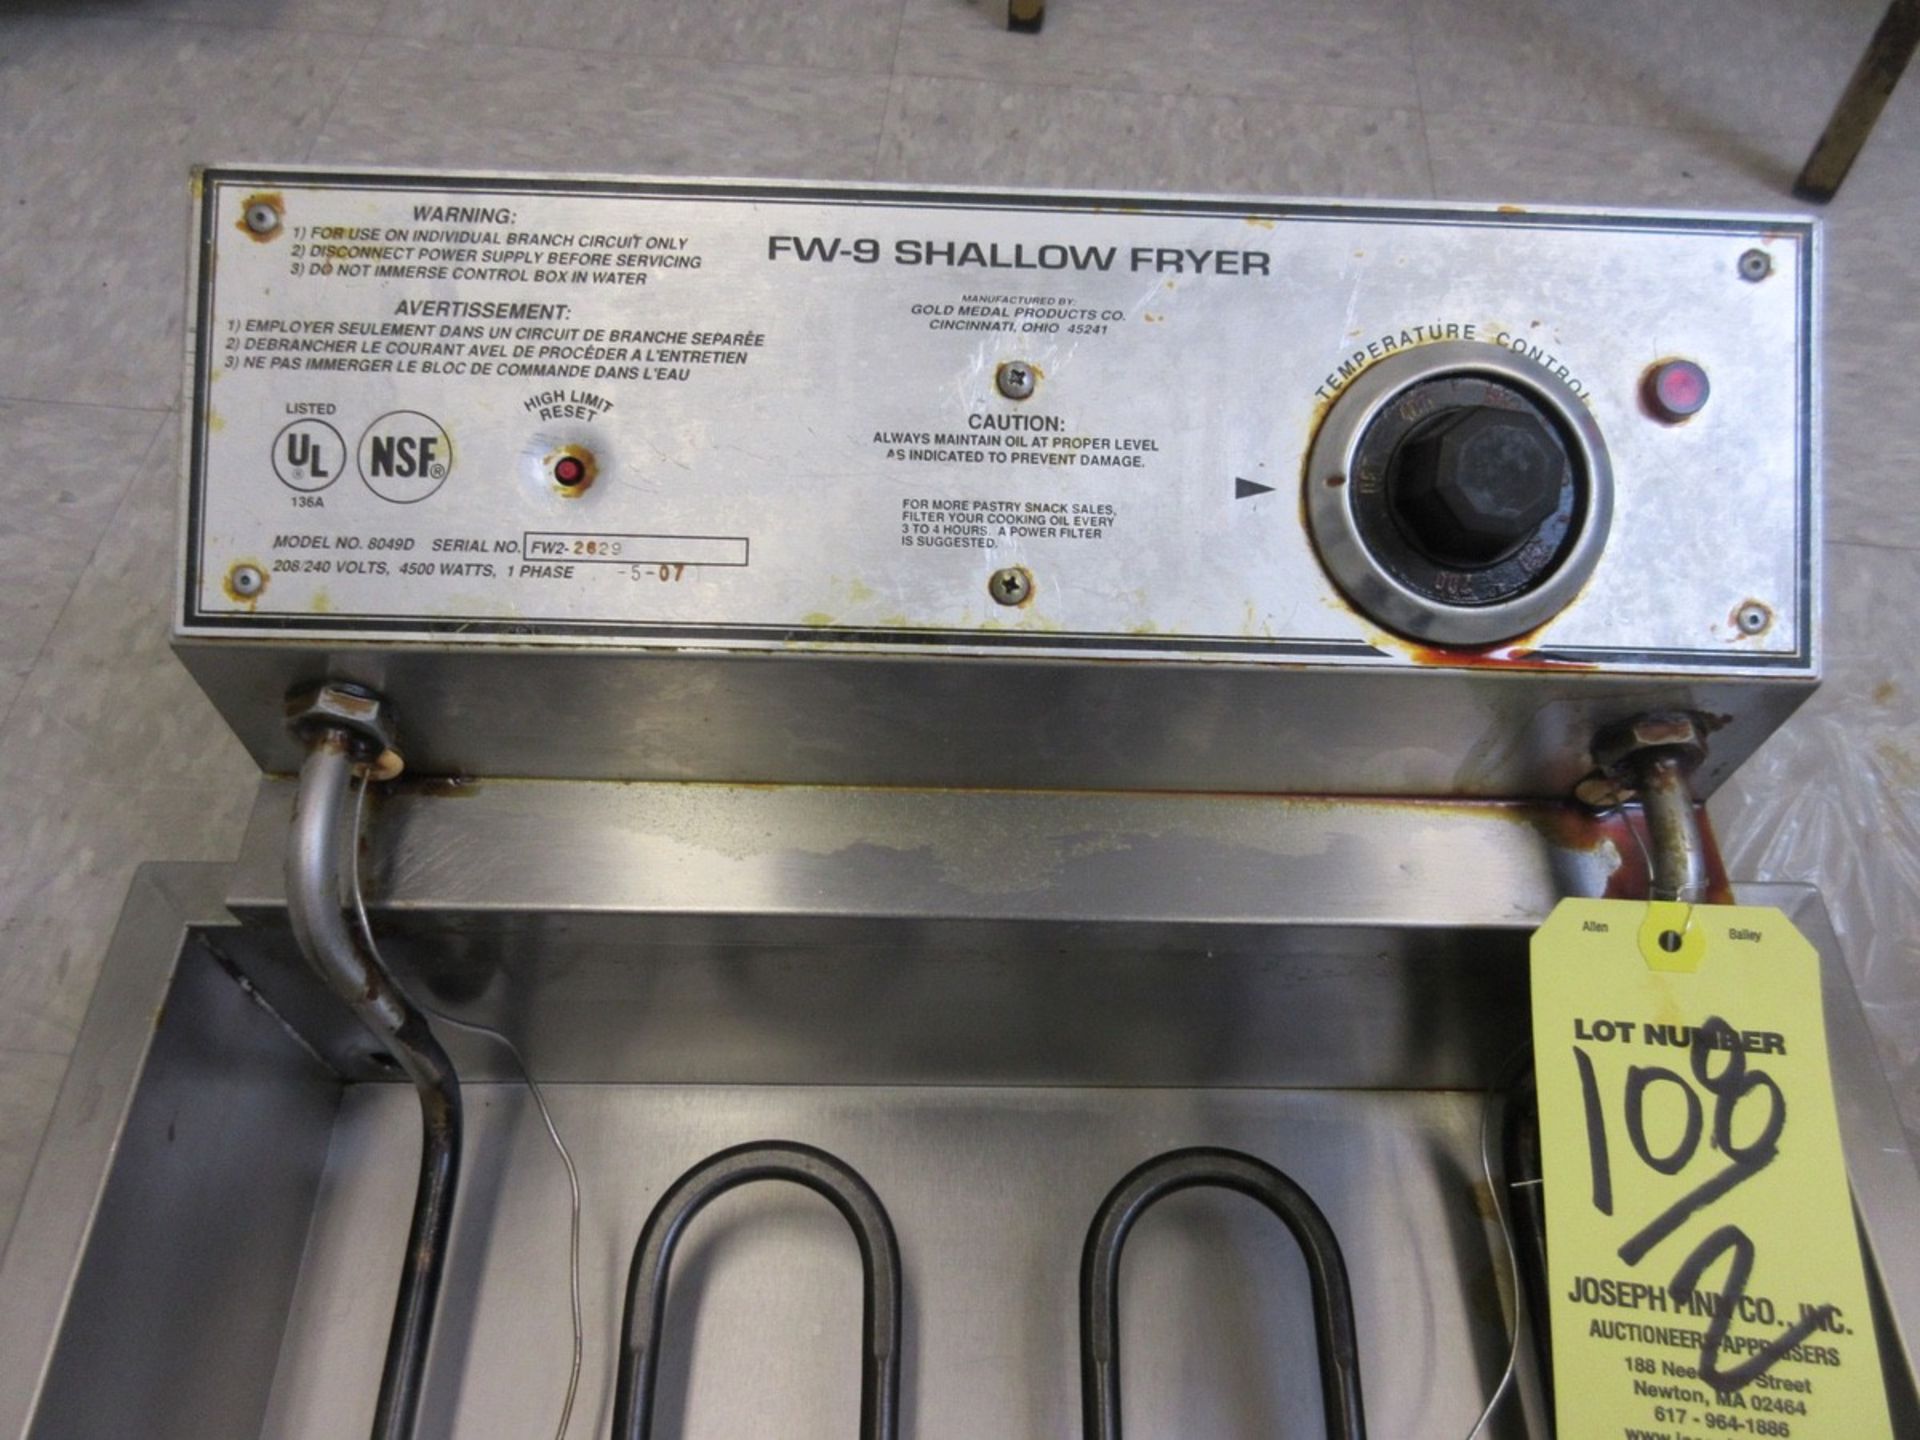 LOT (2) Gold Medal FW-12 Shallow Fryers - Image 2 of 2